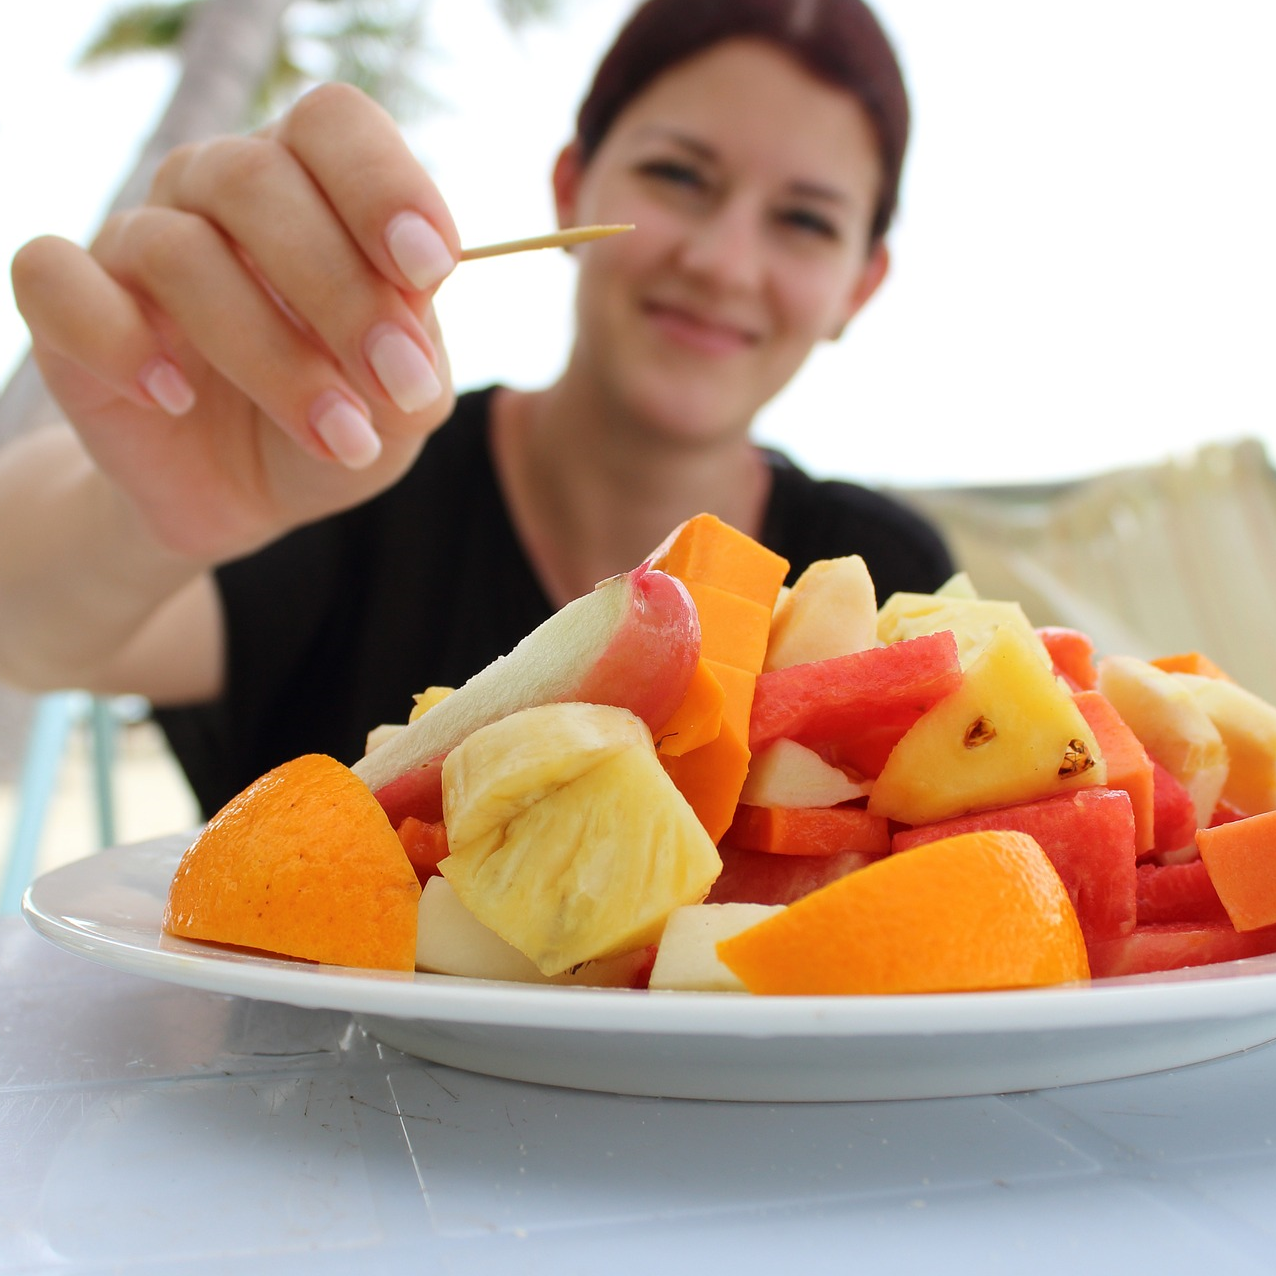 Does Eating Fruits and Veggies Mean Better Mental Health? | Psychology Today